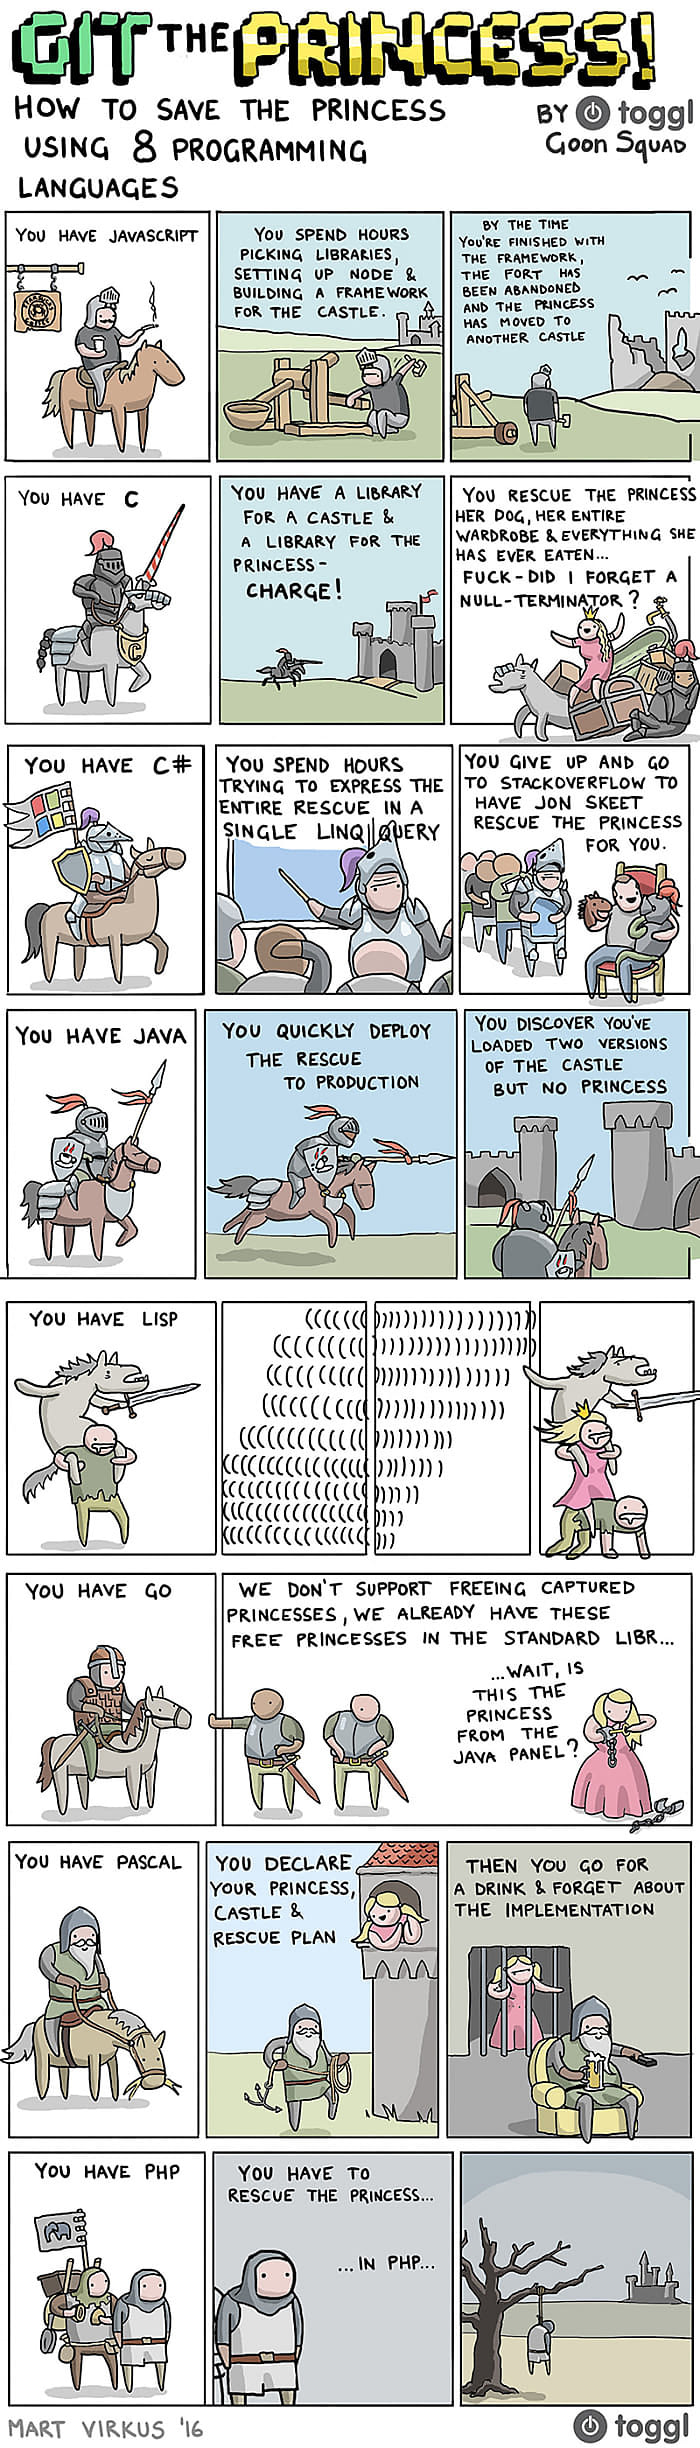 How to save the princess using programming languages